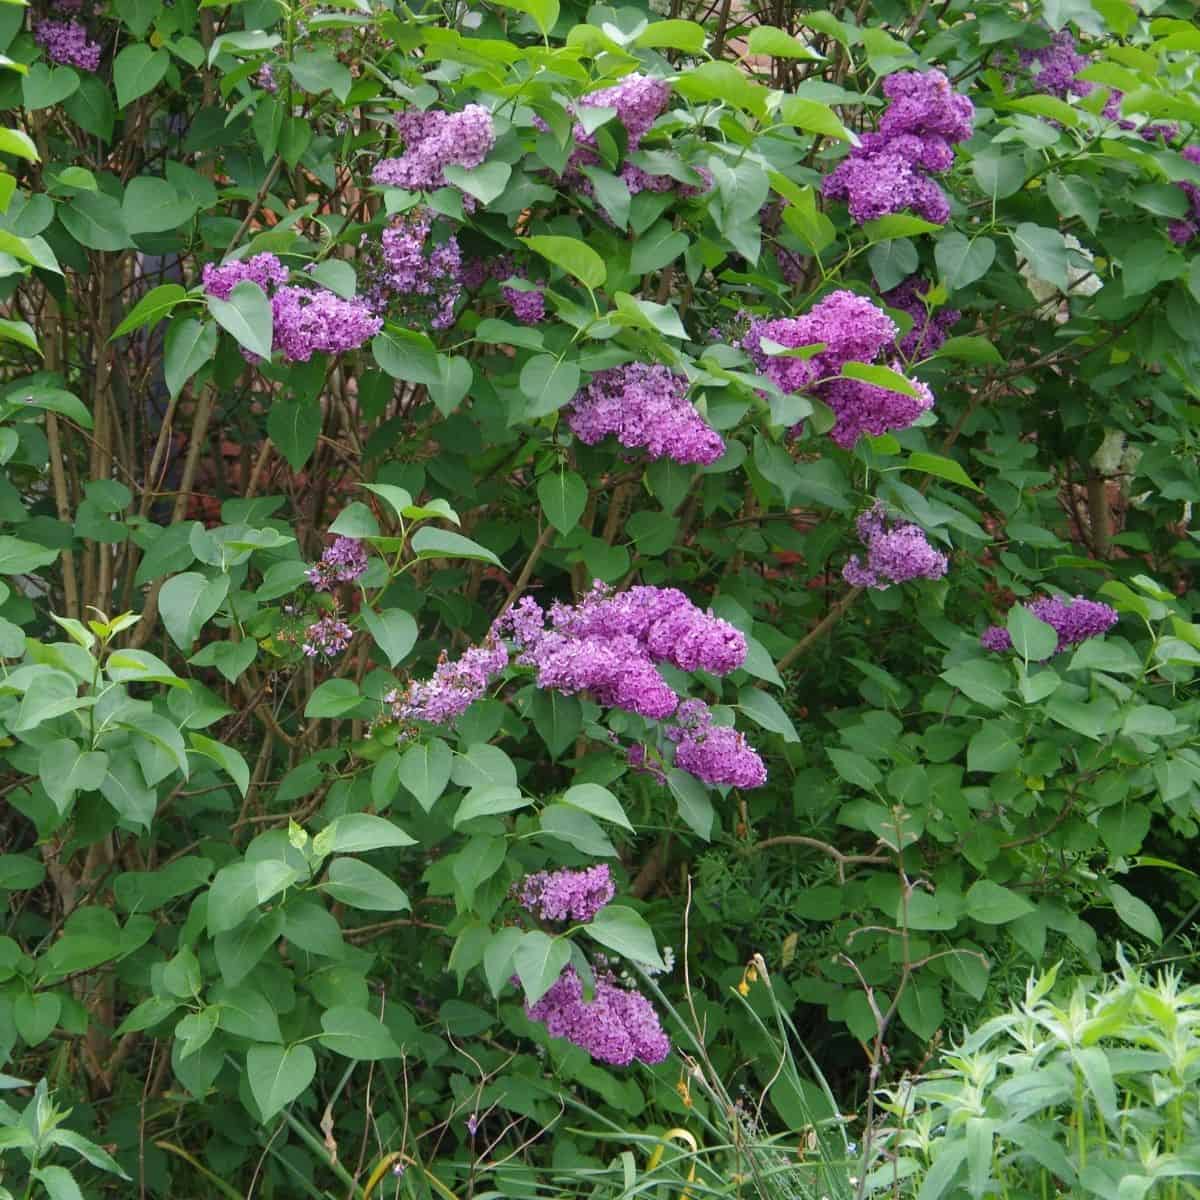 Lilac shrub with pink/purple flower heads